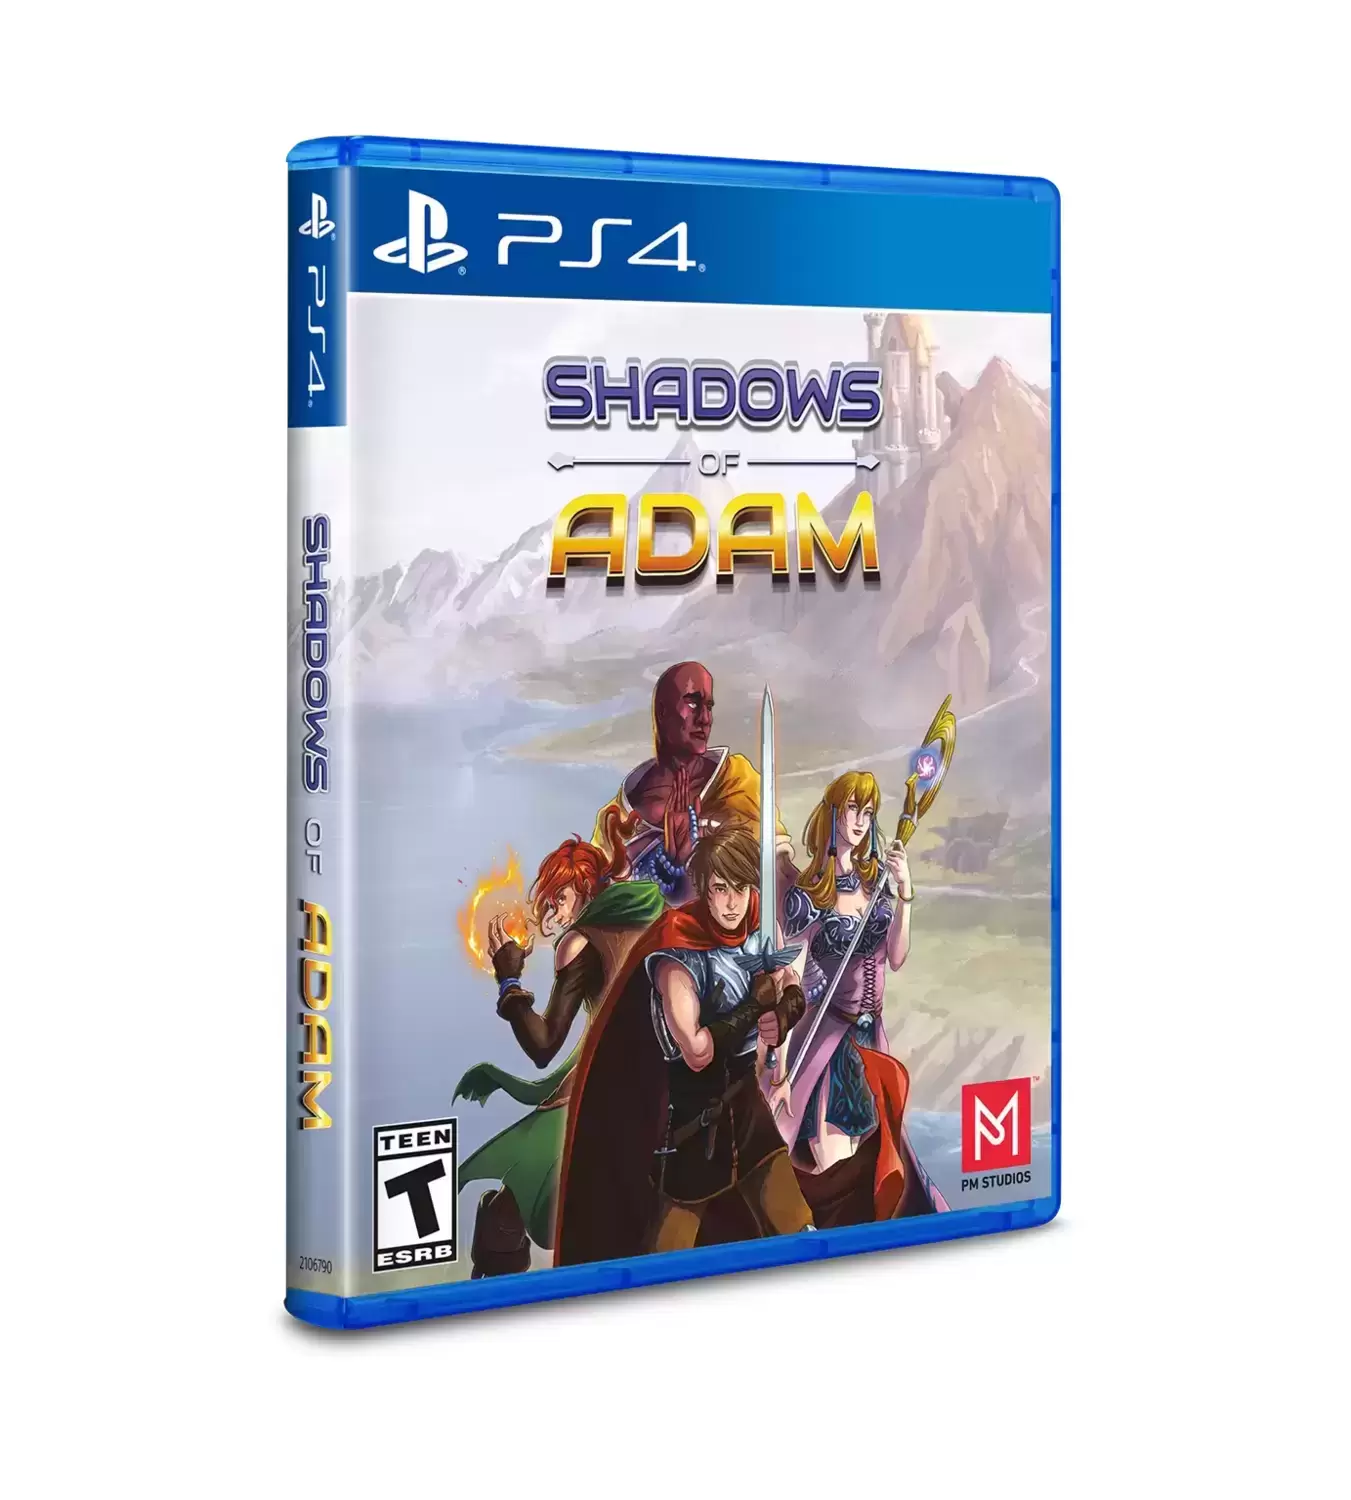 Jeux PS4 - Shadows of Adam